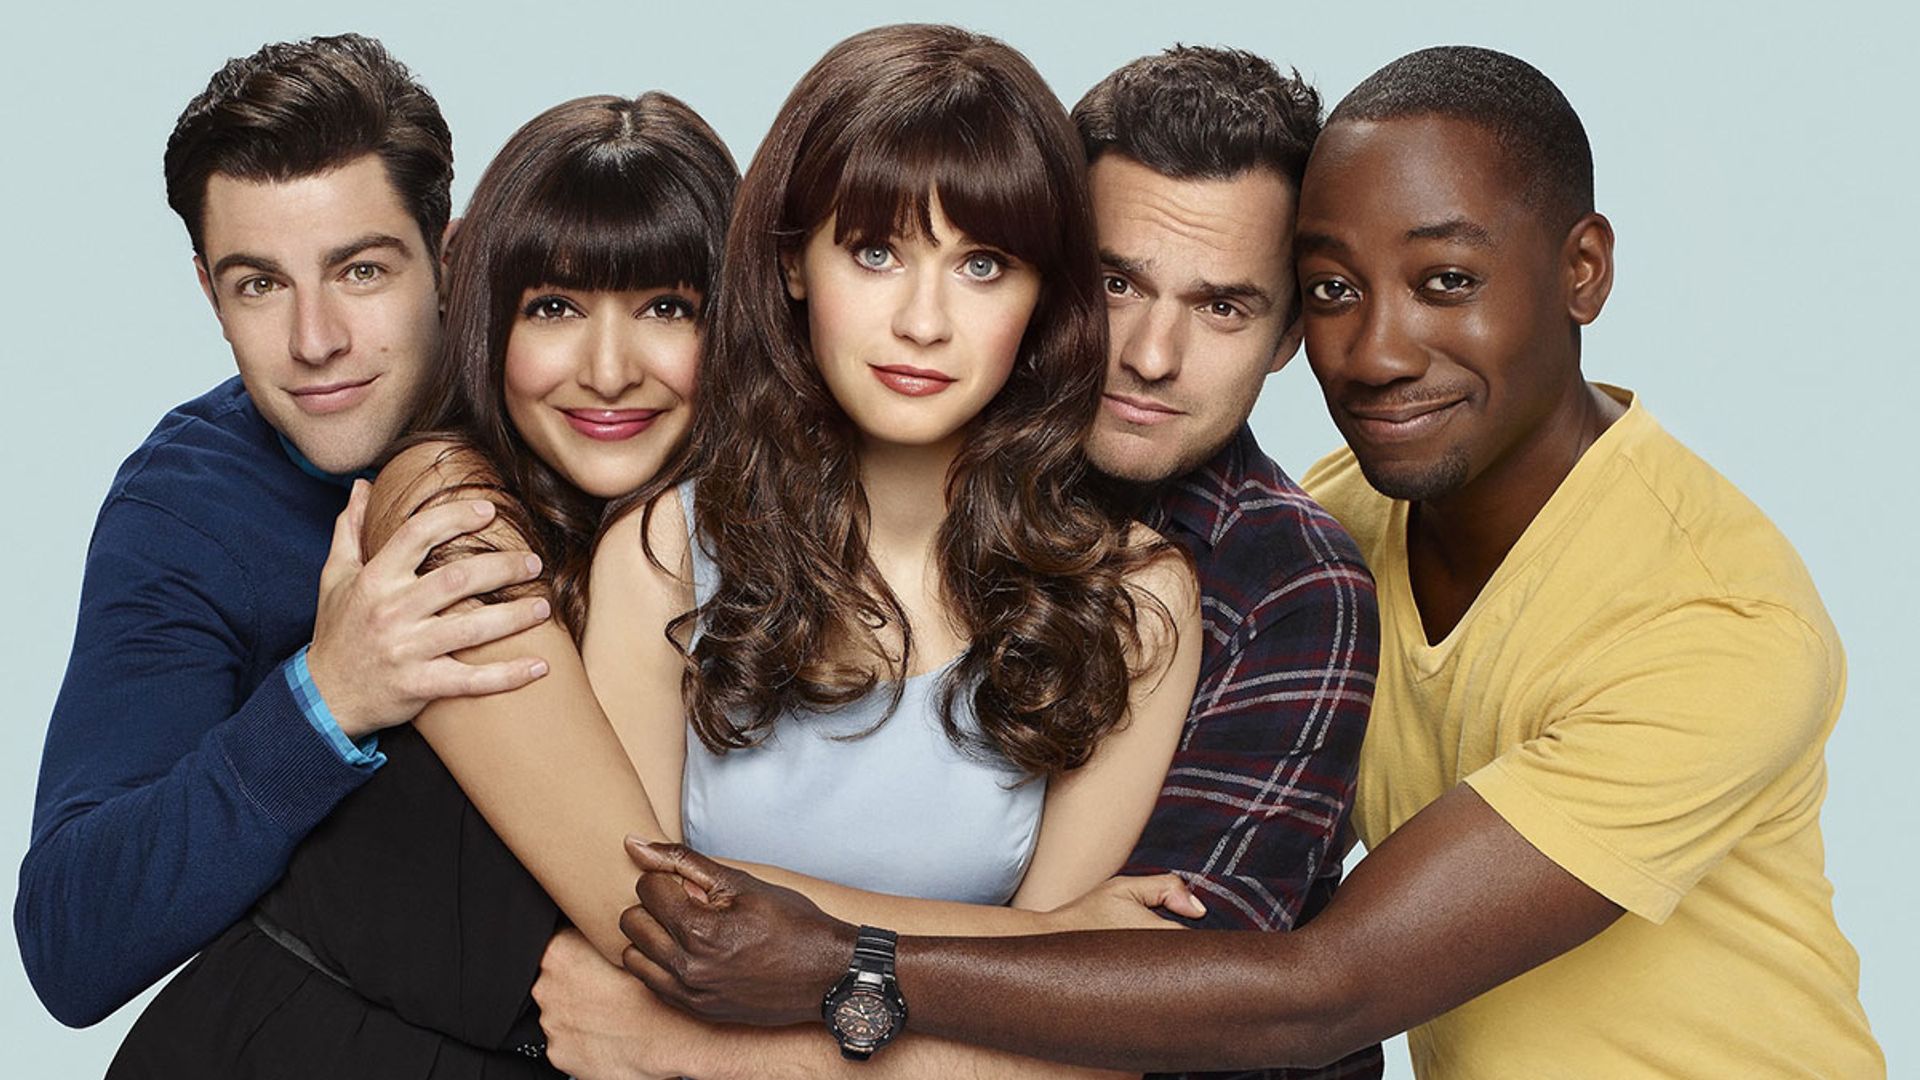 New Girl stars send fans wild with reunion announcement